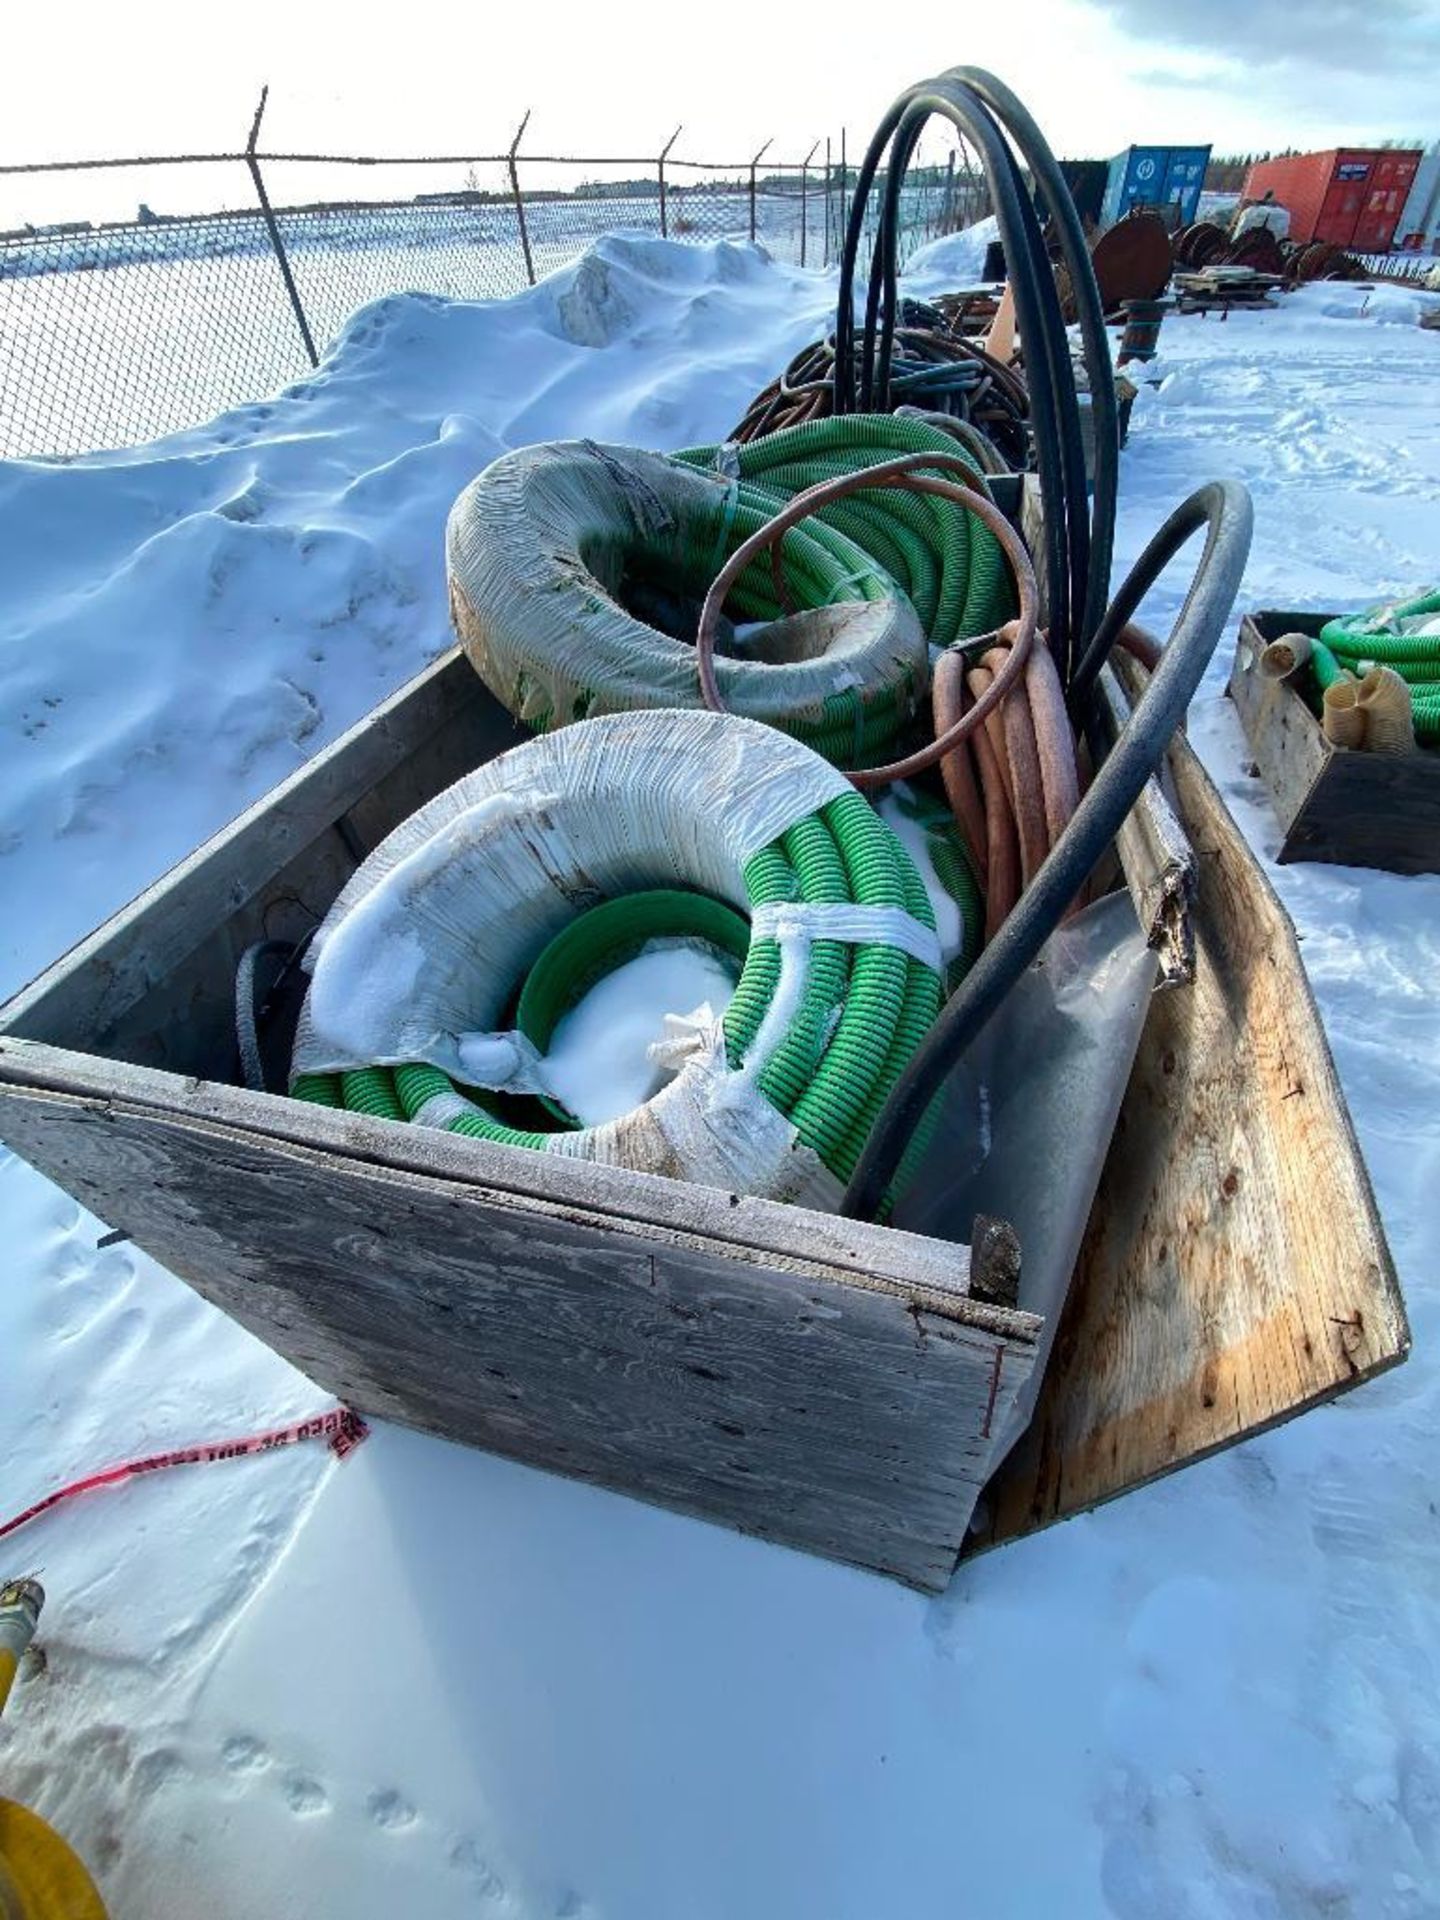 Crate of Asst. Hoses - Image 4 of 4